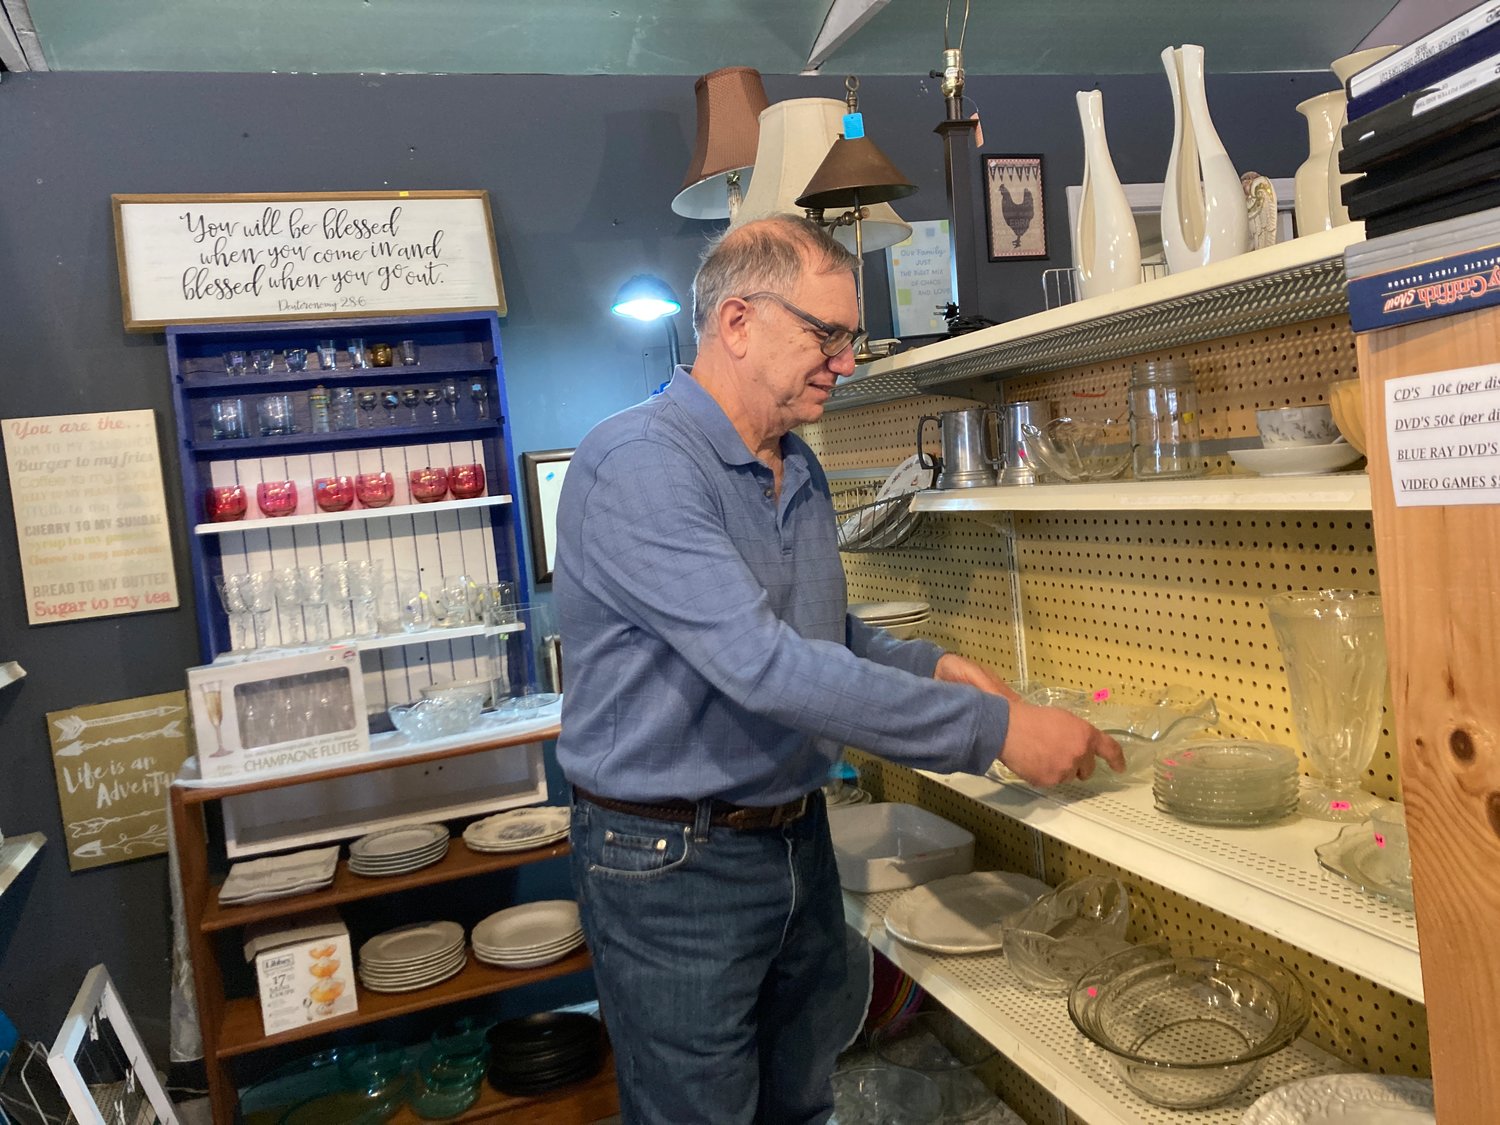 Joe Scibelli has made some changes, including adding new shelving and opening the second floor to customers.